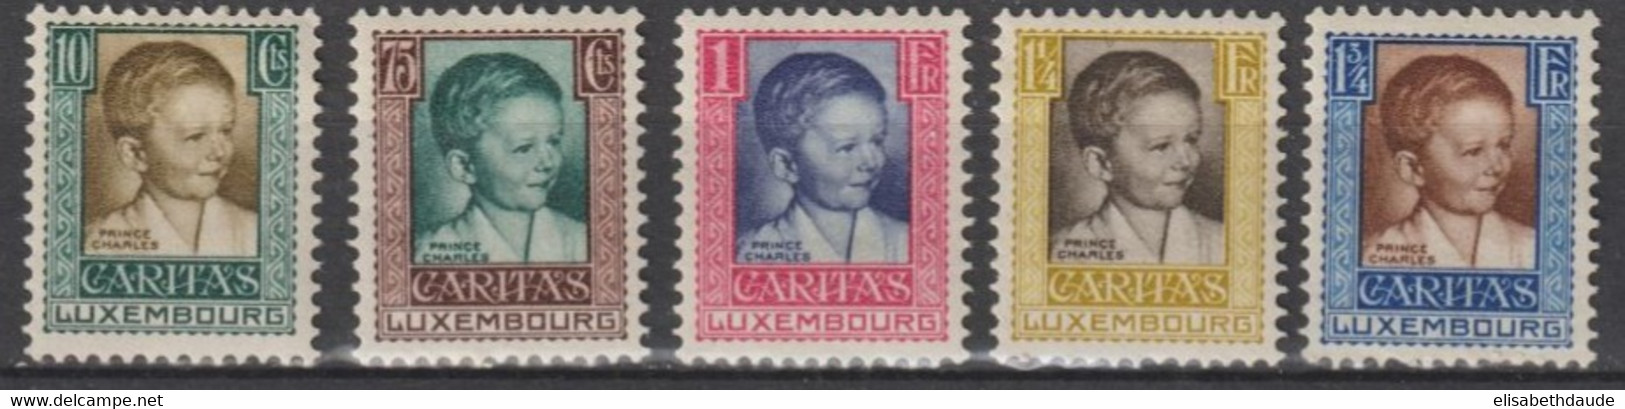 1930 - LUXEMBOURG - YVERT N°226/230 * MLH - COTE = 20 EUR. - Neufs